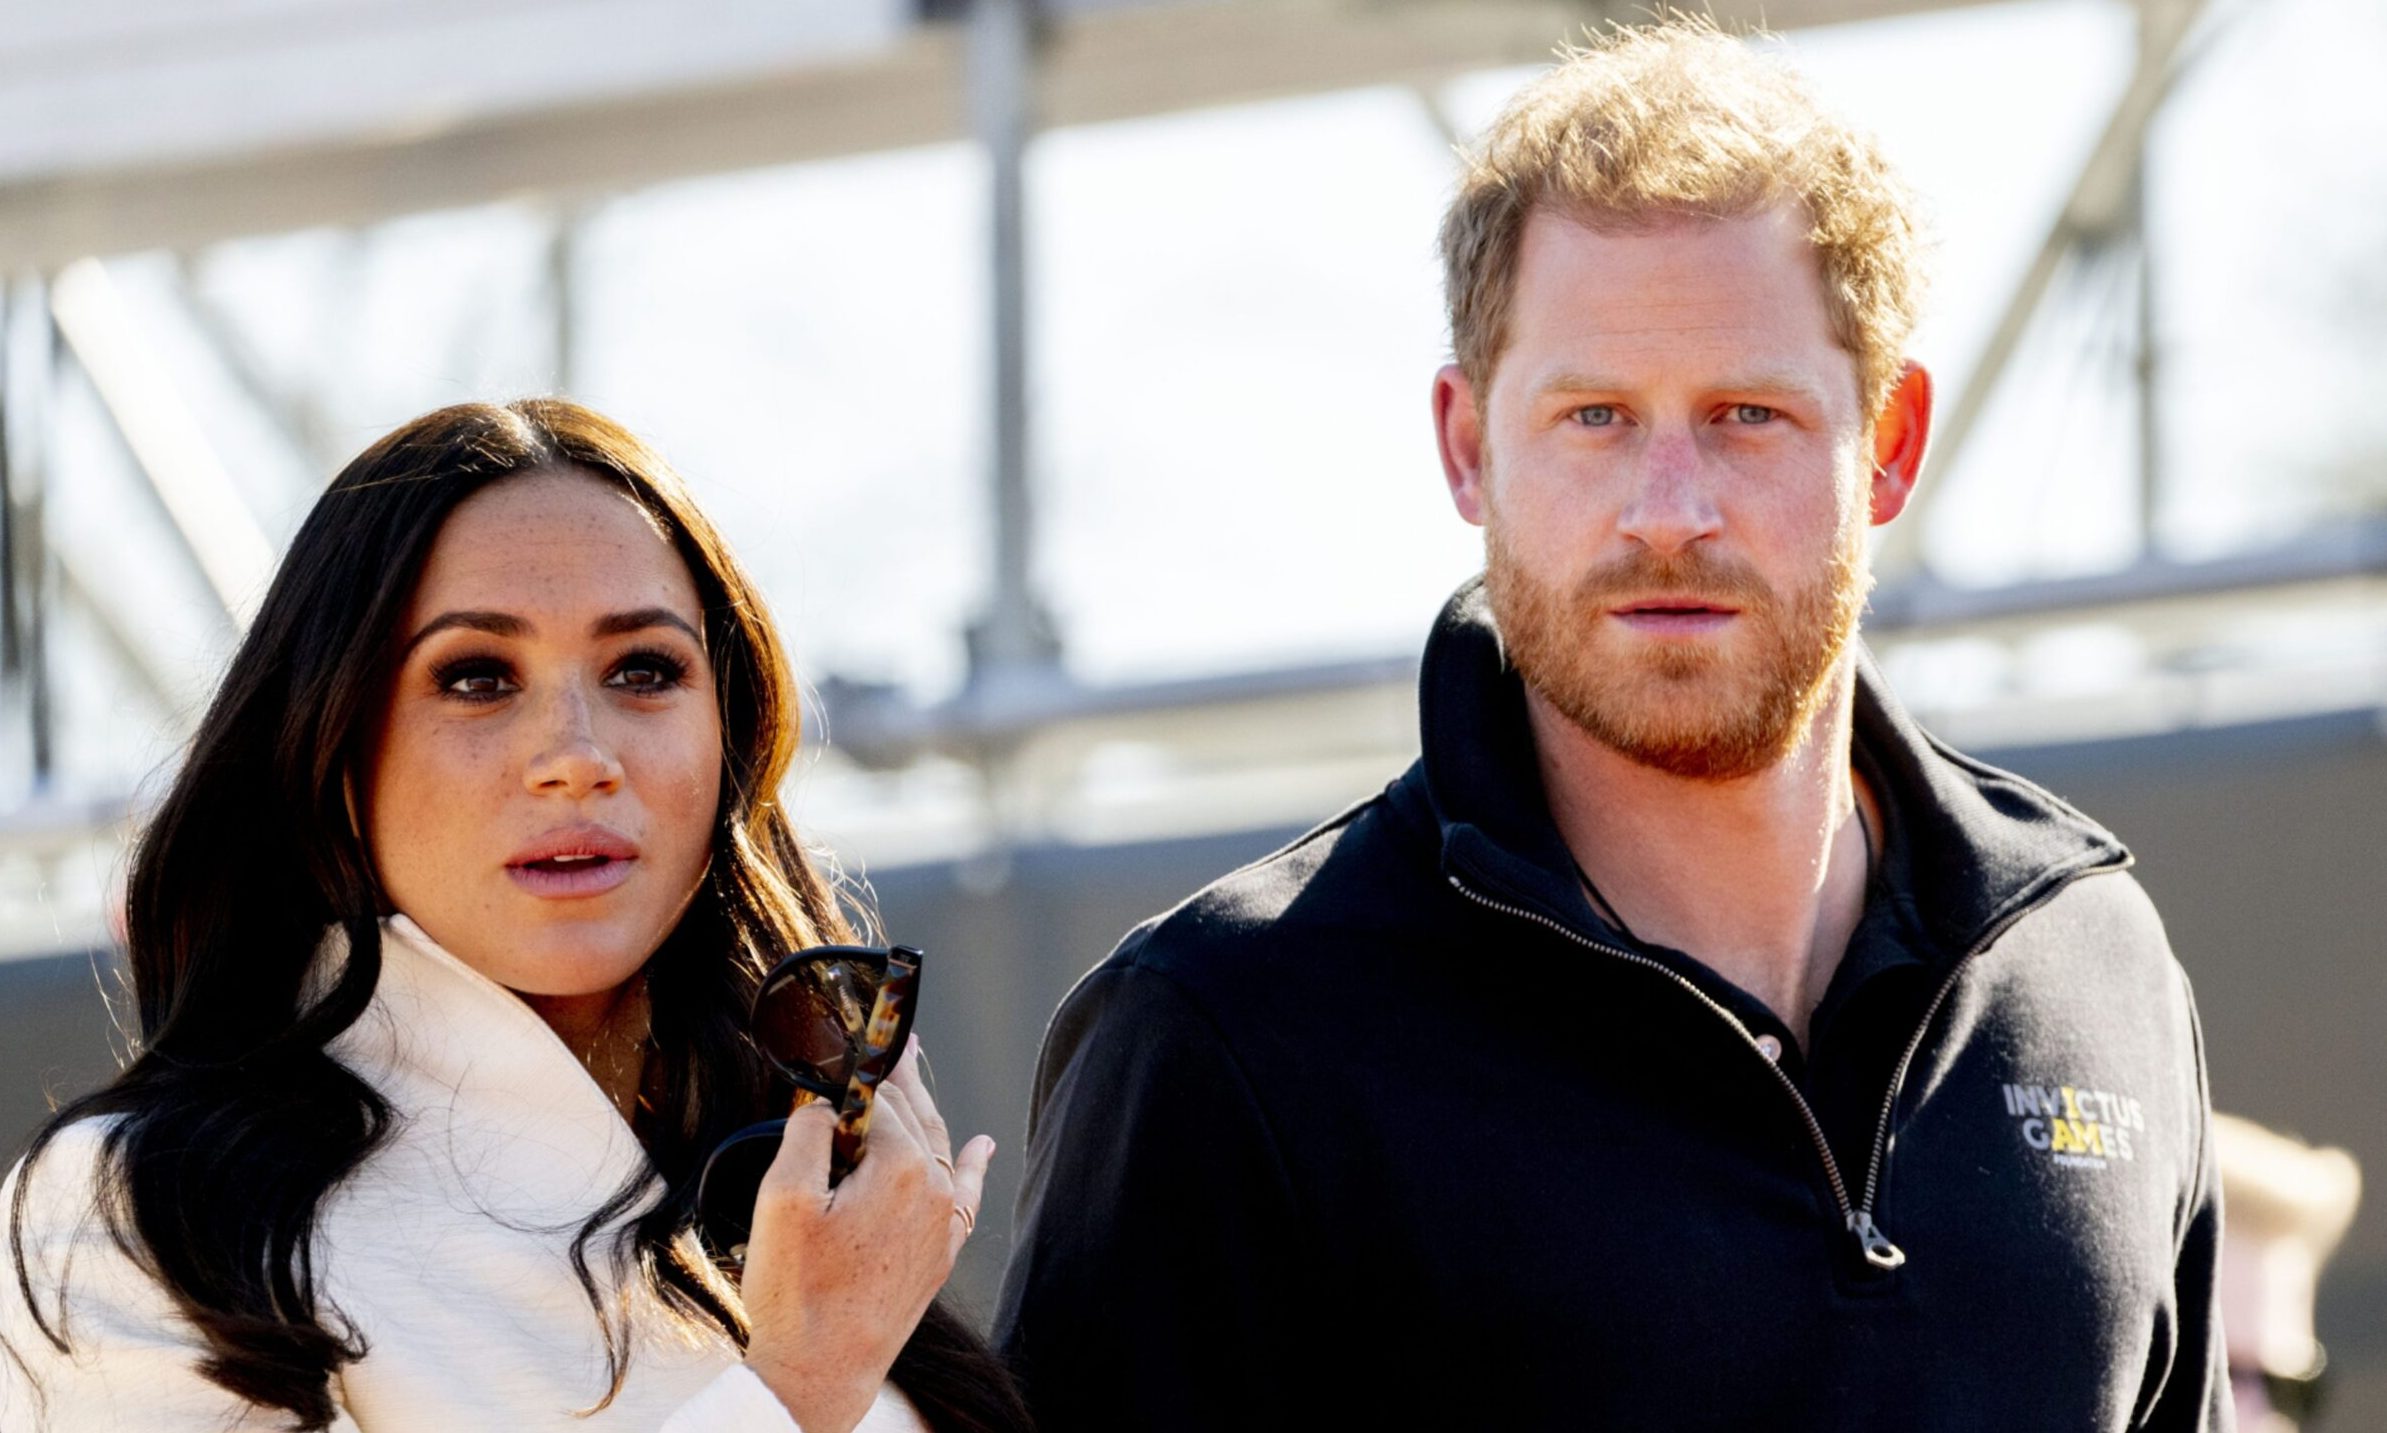 MARTEL MAXWELL: Harry and Meghan fans are a dying breed